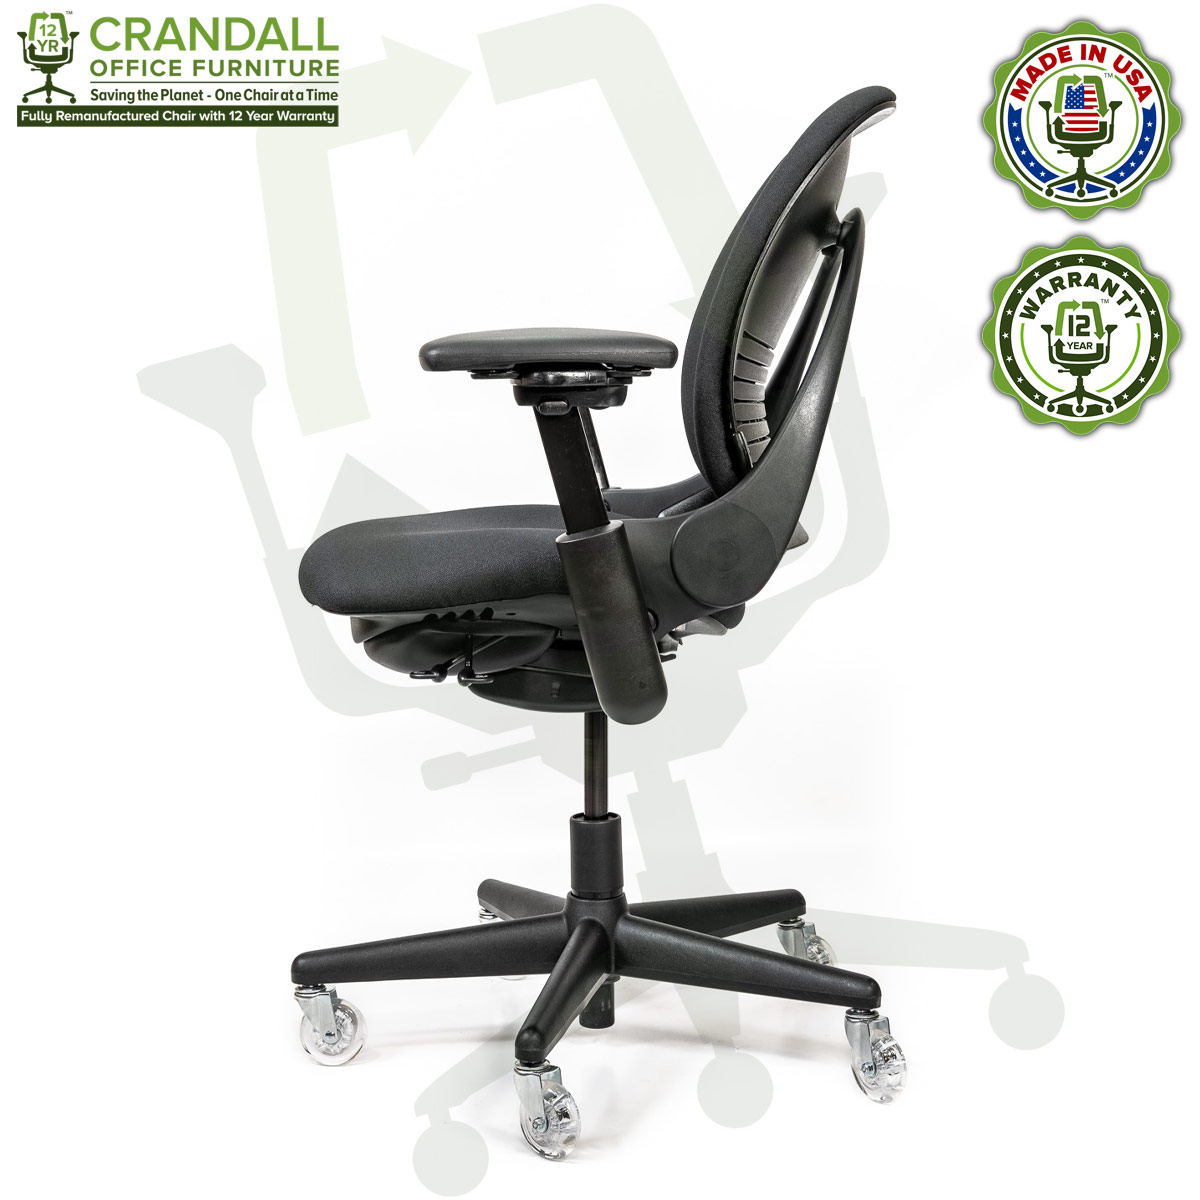 Soft Dual Wheel Hard Floor Casters Black Frame and 7 Tall Seat Height Base Steelcase Leap Desk Task Chair in Buzz2 5G52 Barley Fabric 4-Way Highly Adjustable Arms 